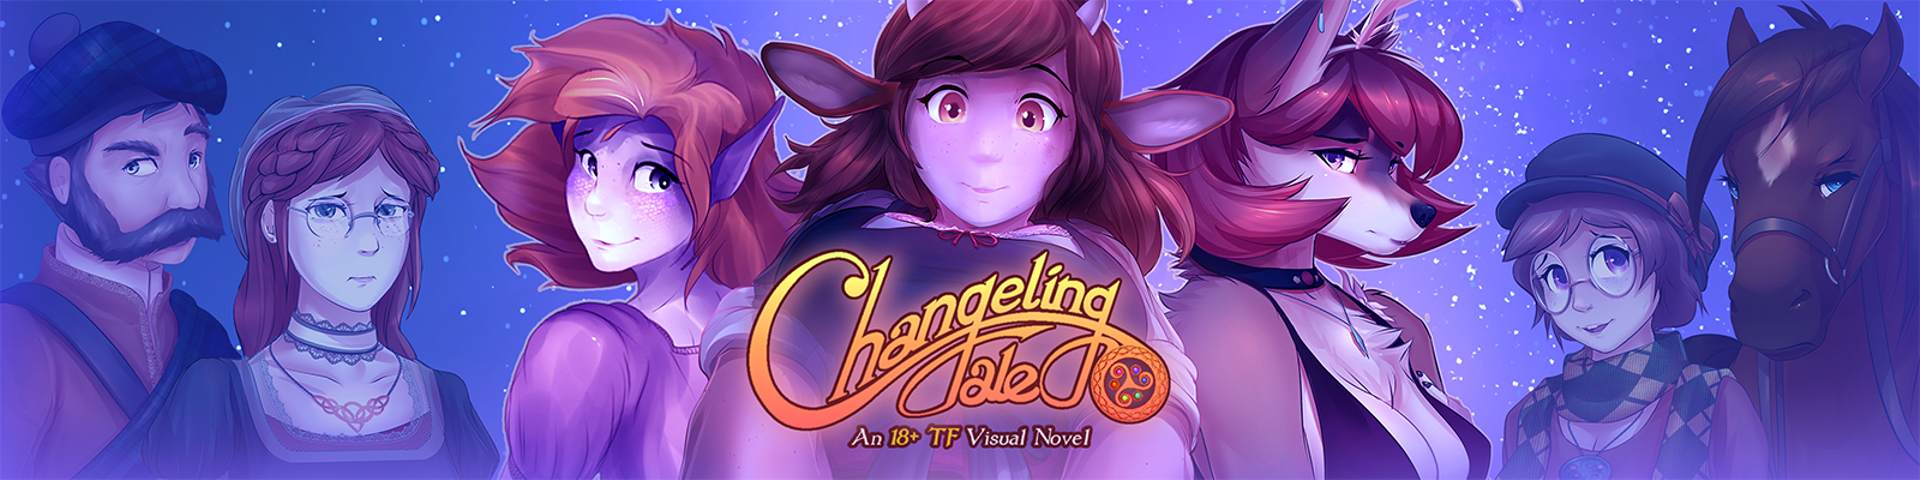 Changeling Tale [Little Napoleon] Adult xxx Game Download